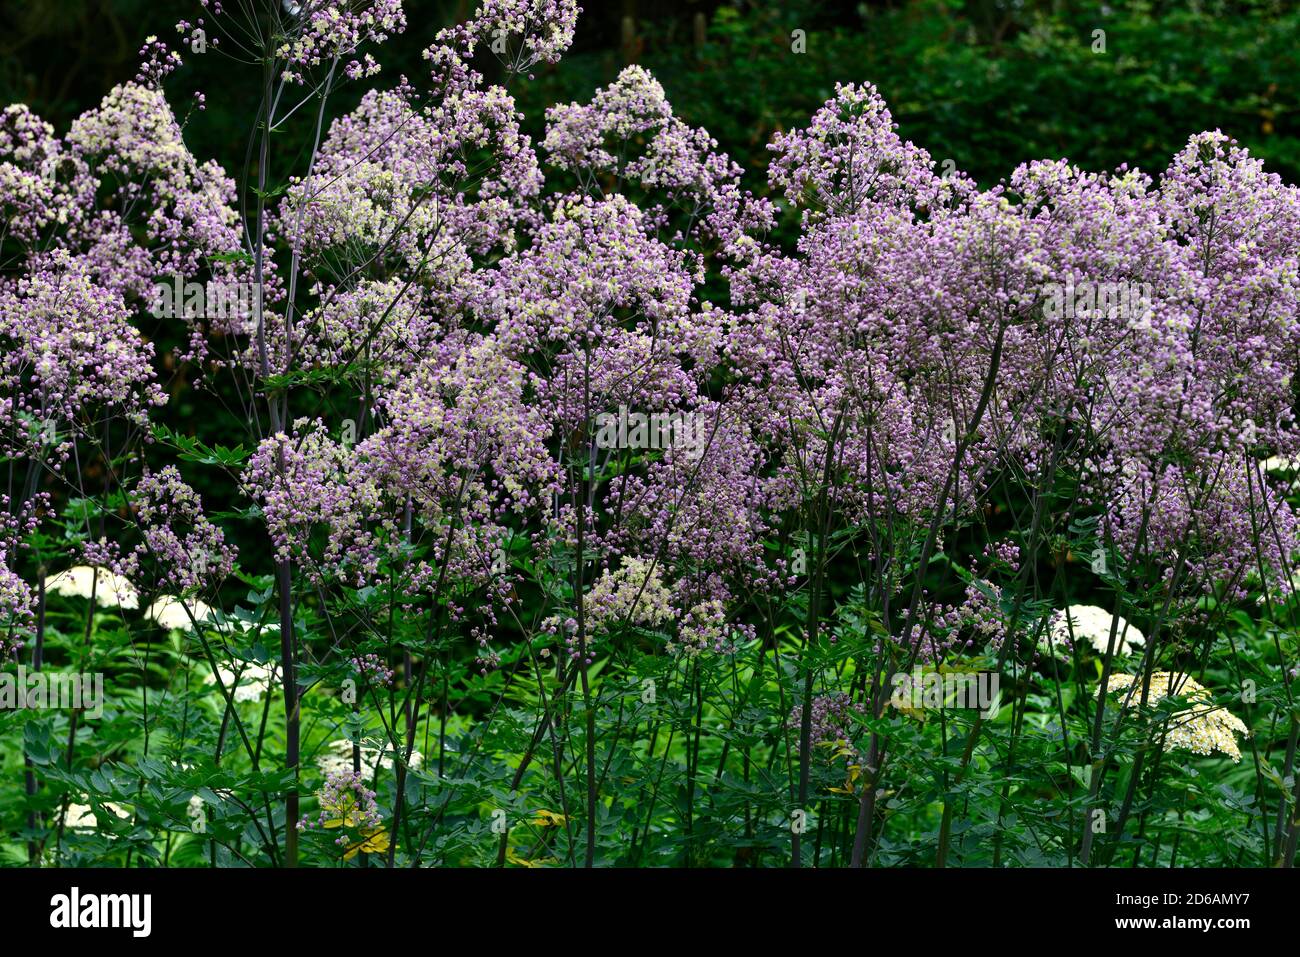 thalictrum elin,tall meadow rue,lacy blue-green foliage,purple,lilac flowers,flowering,RM floral Stock Photo